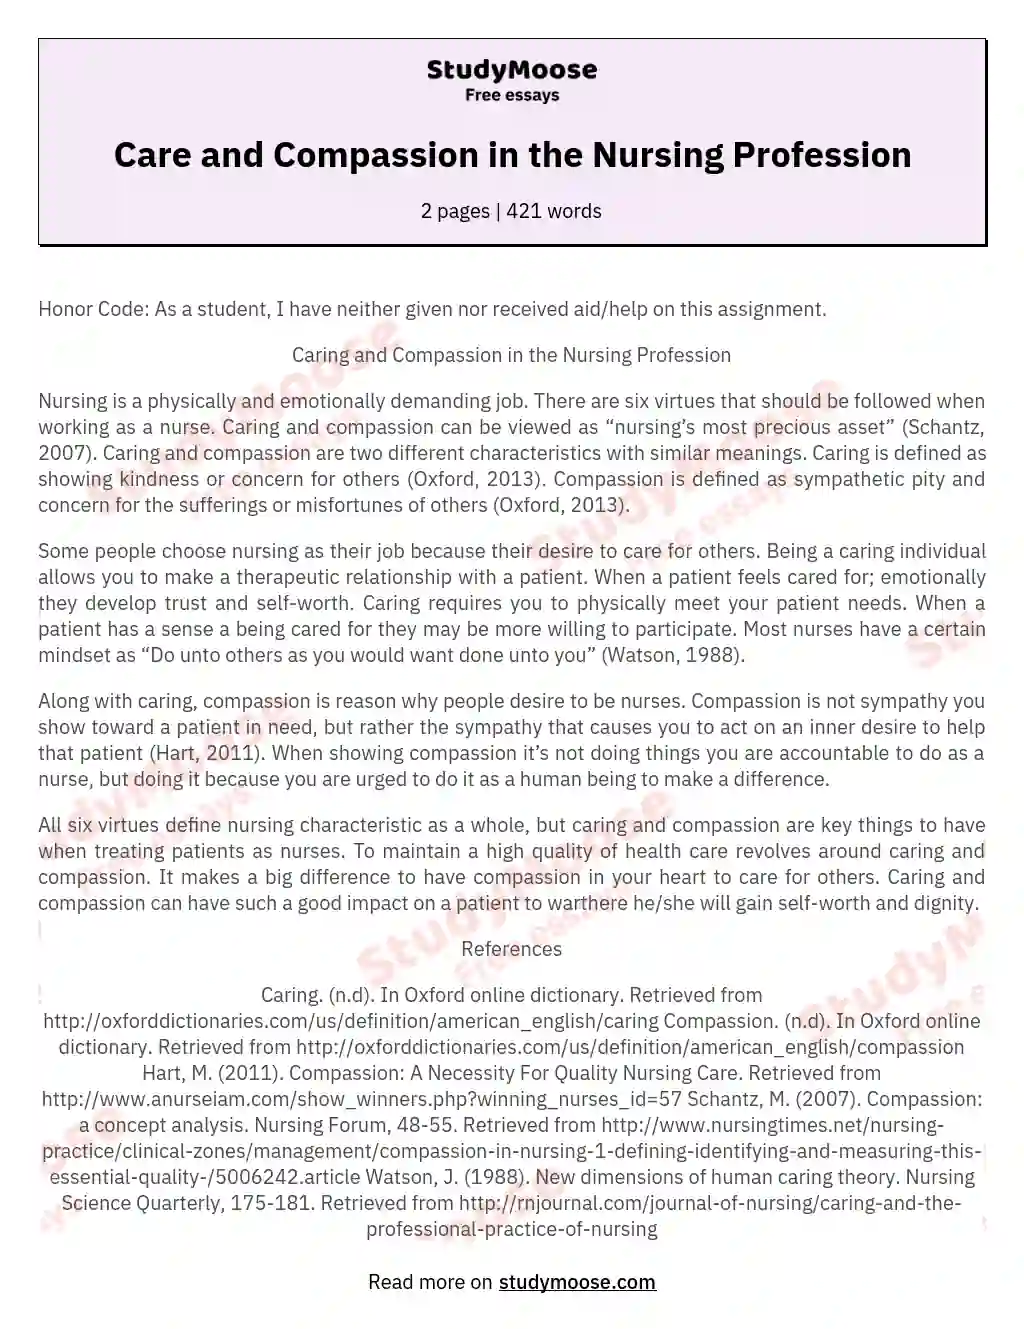 Care and Compassion in the Nursing Profession essay